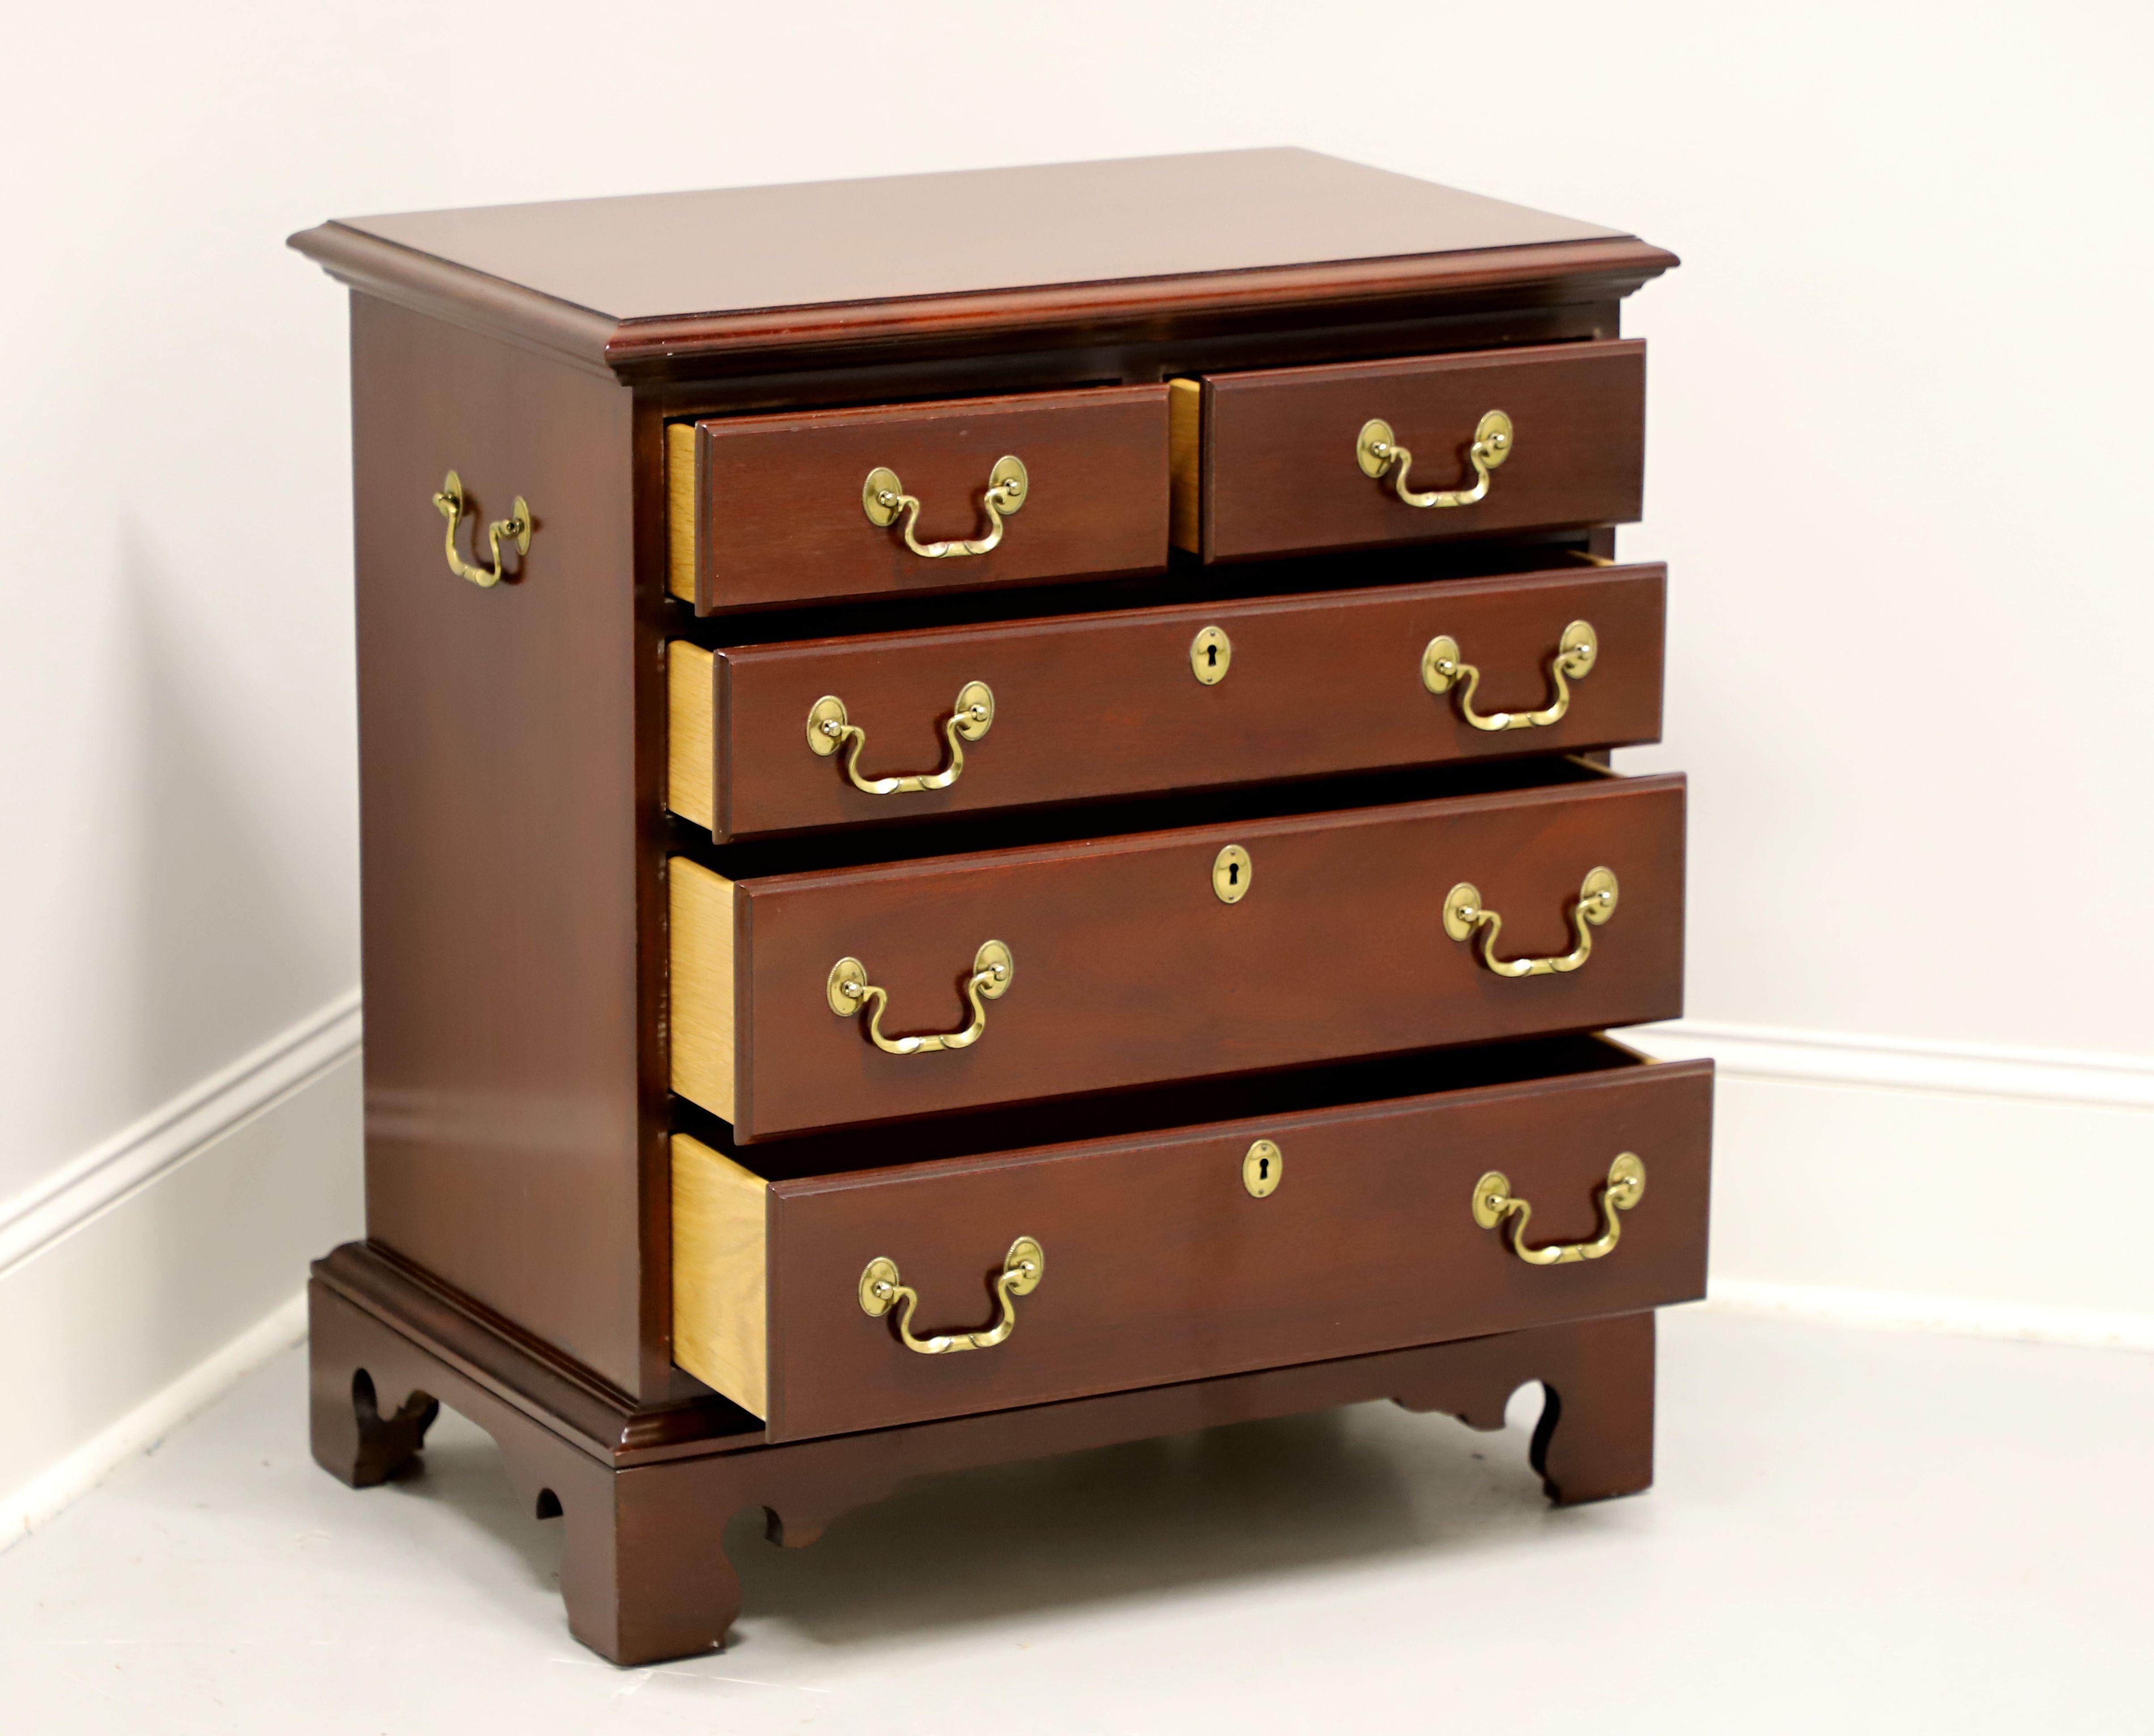 American LINK-TAYLOR Heirloom Planters Solid Mahogany Chippendale Bedside Chest - A